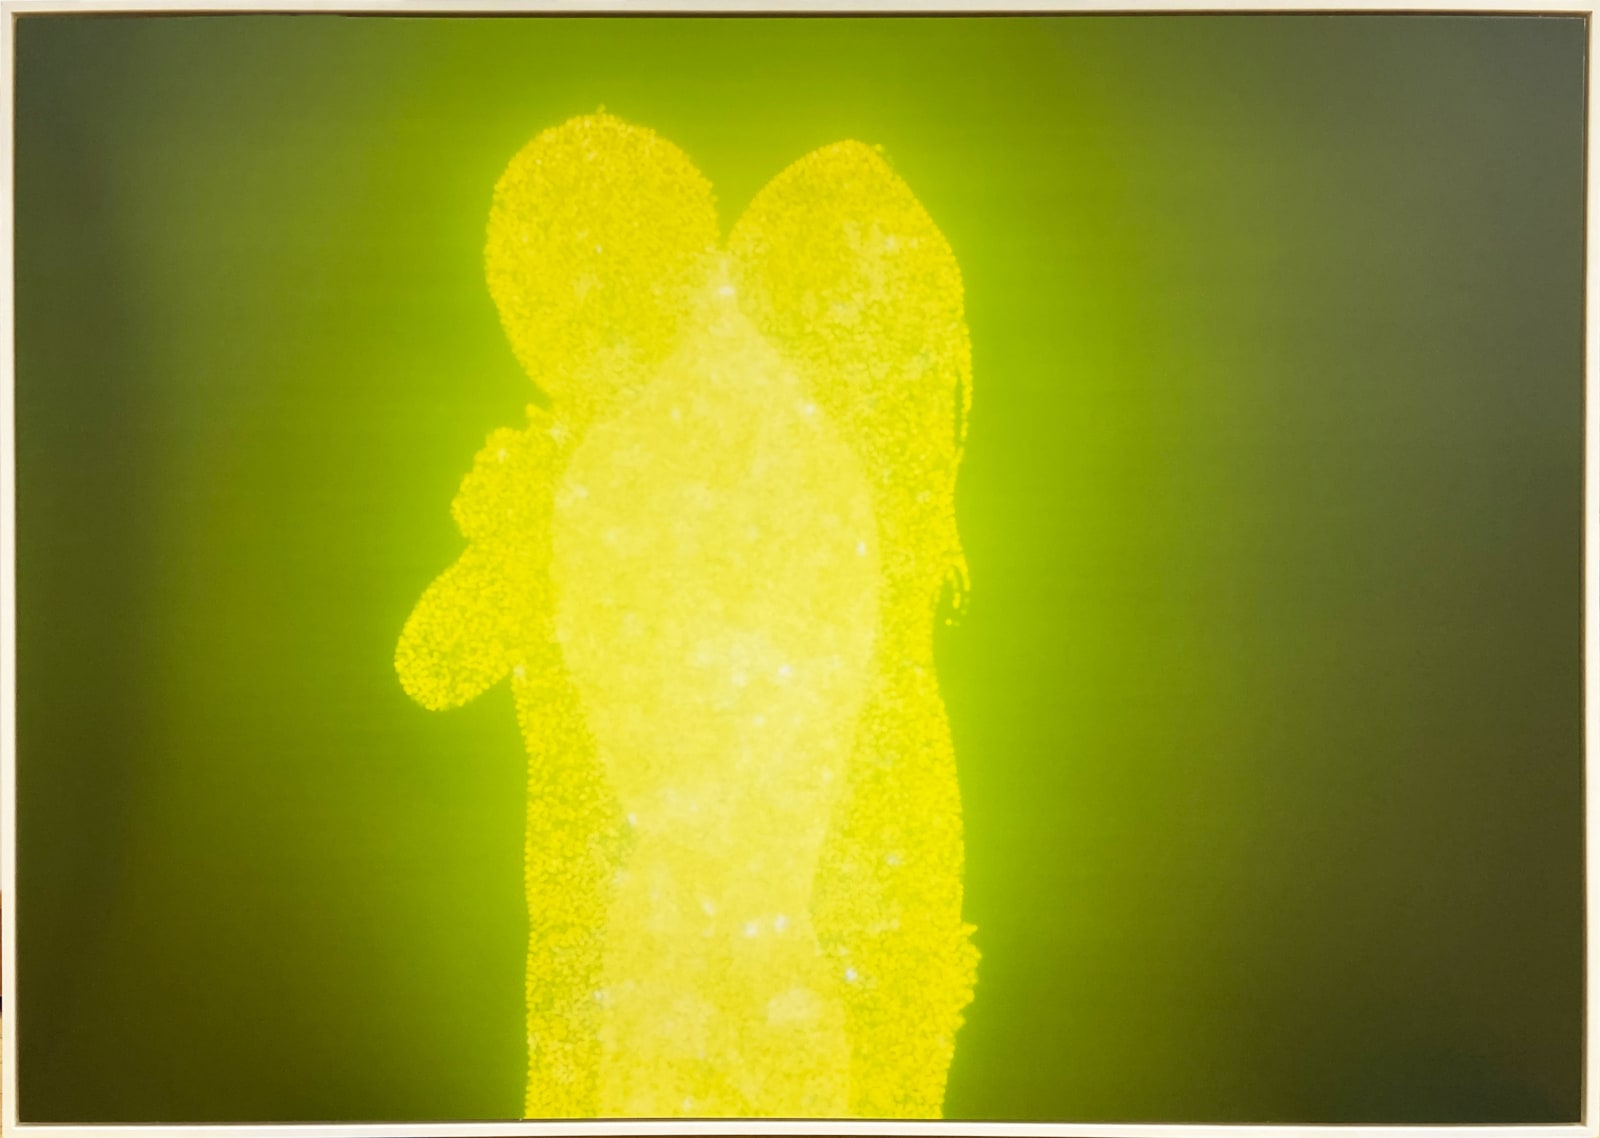 Christopher Bucklow Tetrarch, 9:36 am, 29 November silhouette of two people embracing in light coming through green background